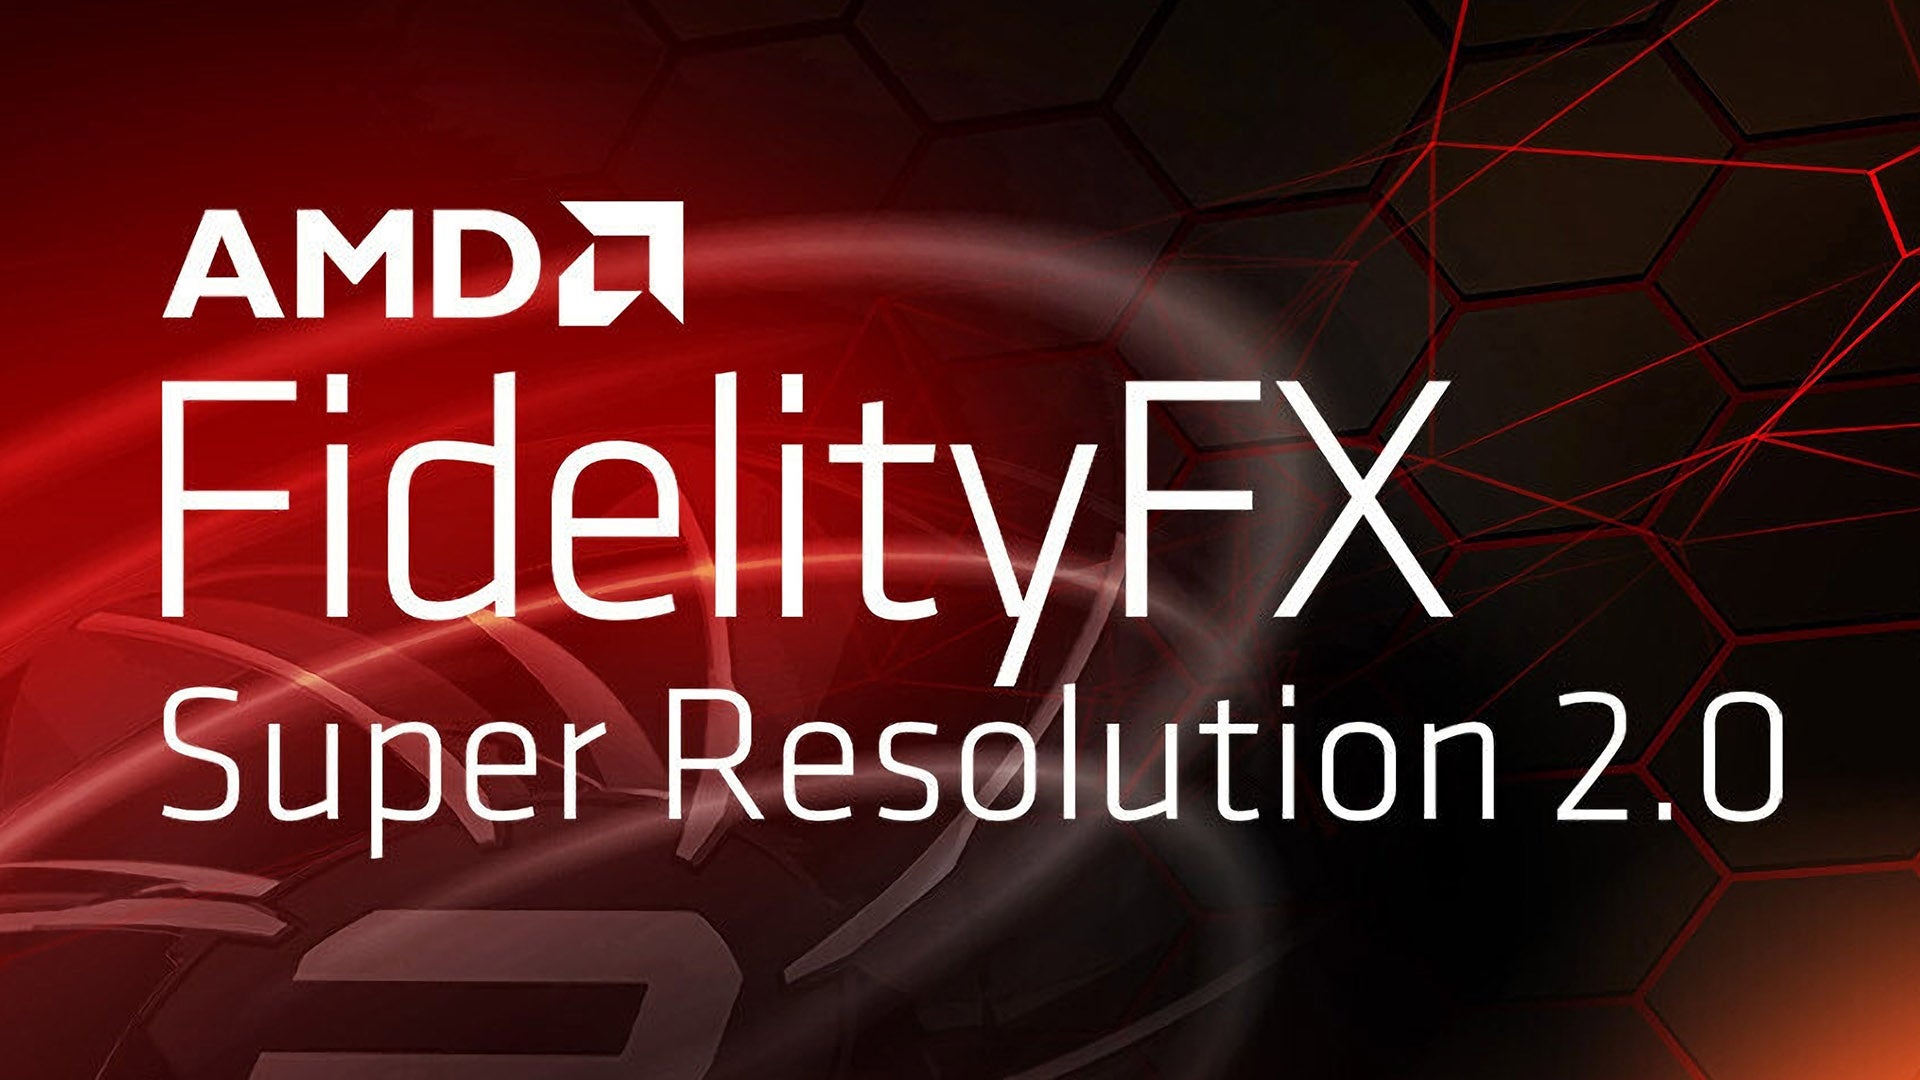 Image for AMD Fidelity FX Super Resolution 2.0: the new Radeon upscaler is genuinely impressive